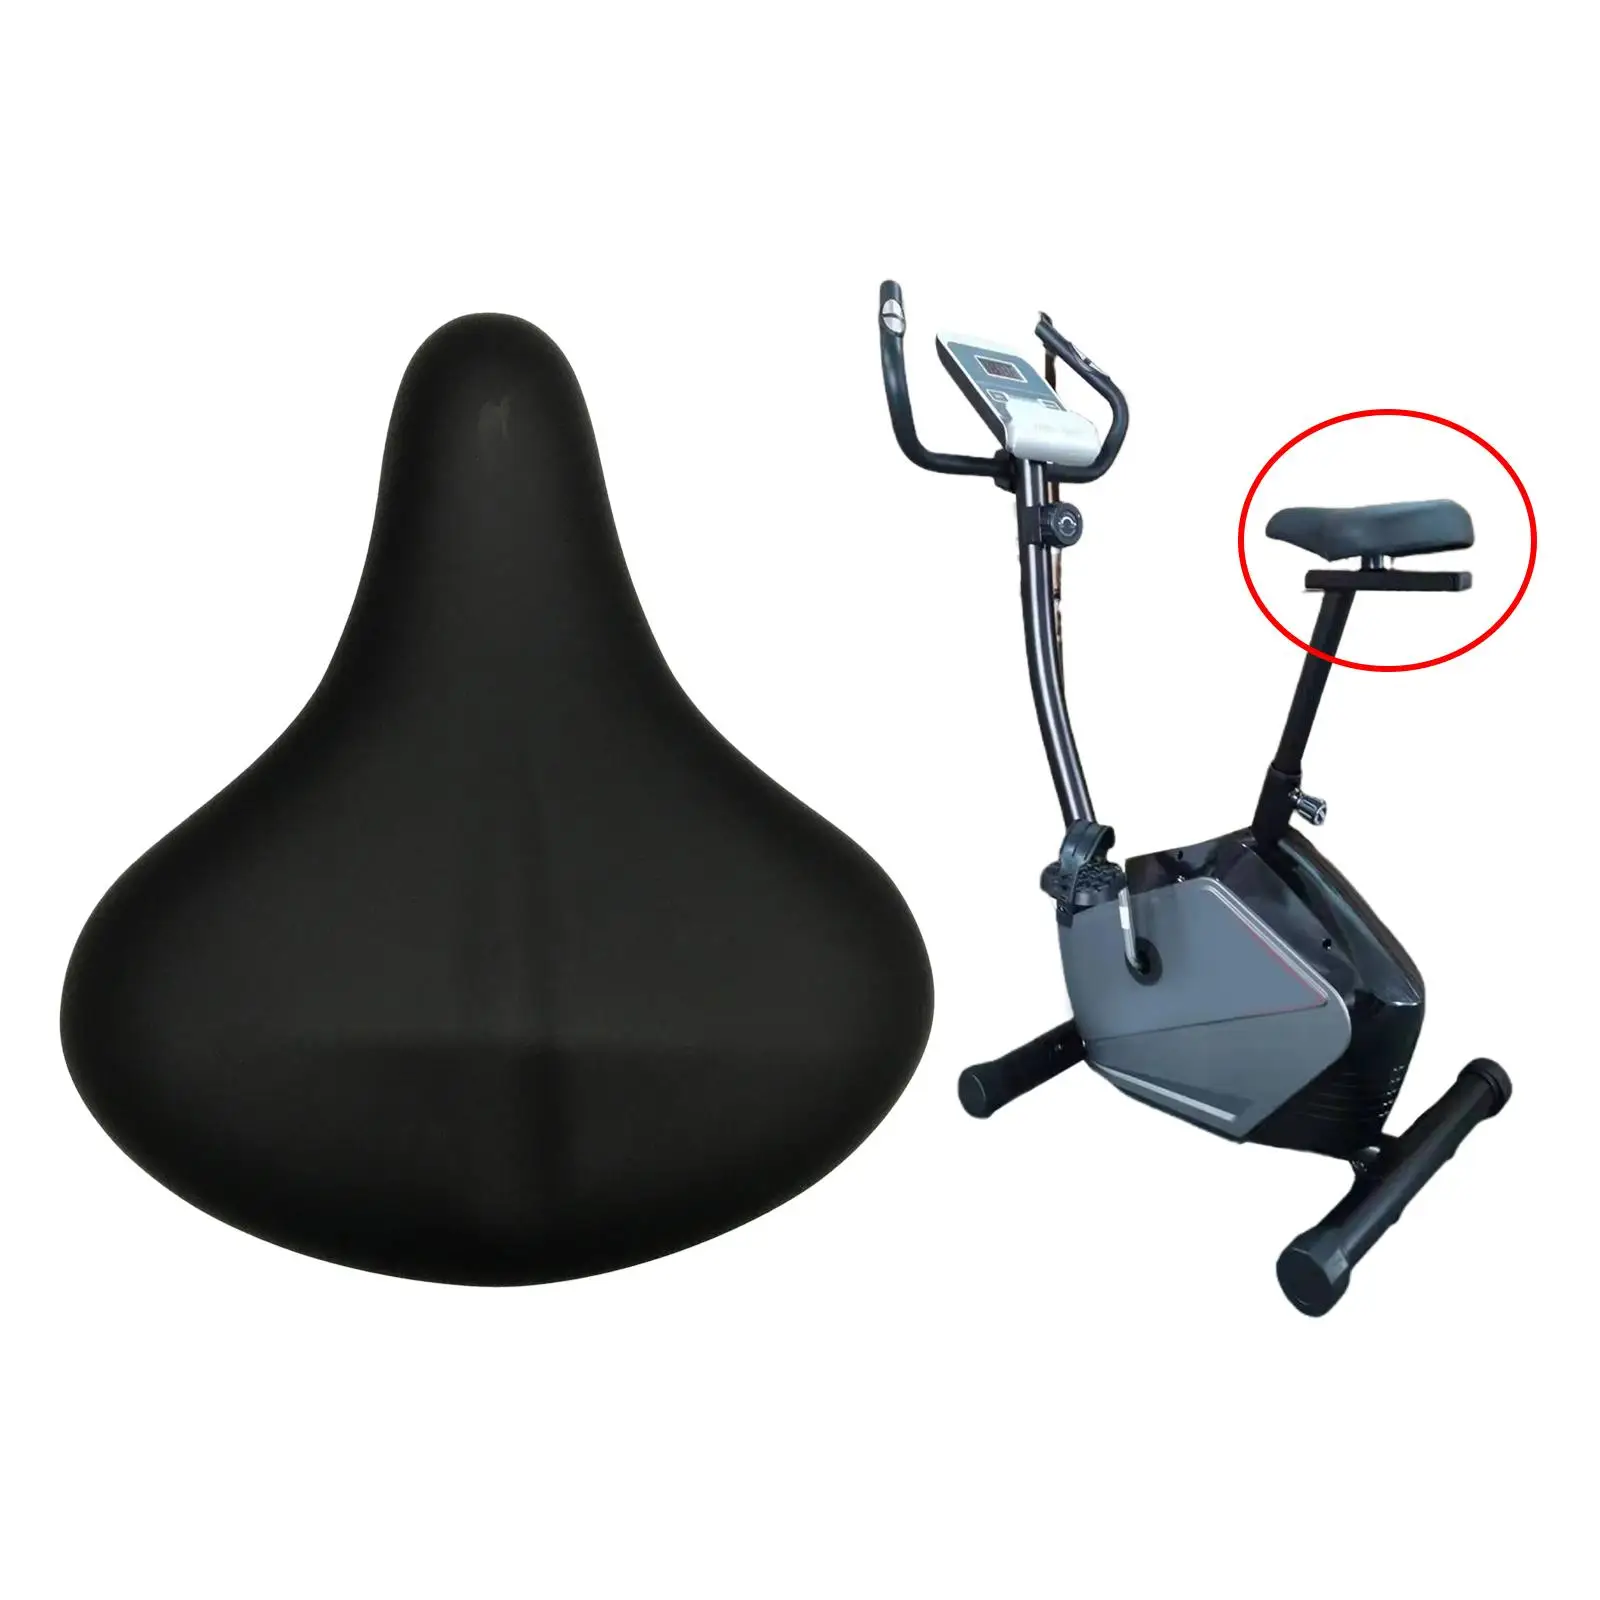 Comfort Bike Seat Padded High Density Foam Bicycle Seat for Stationary Bike Youth